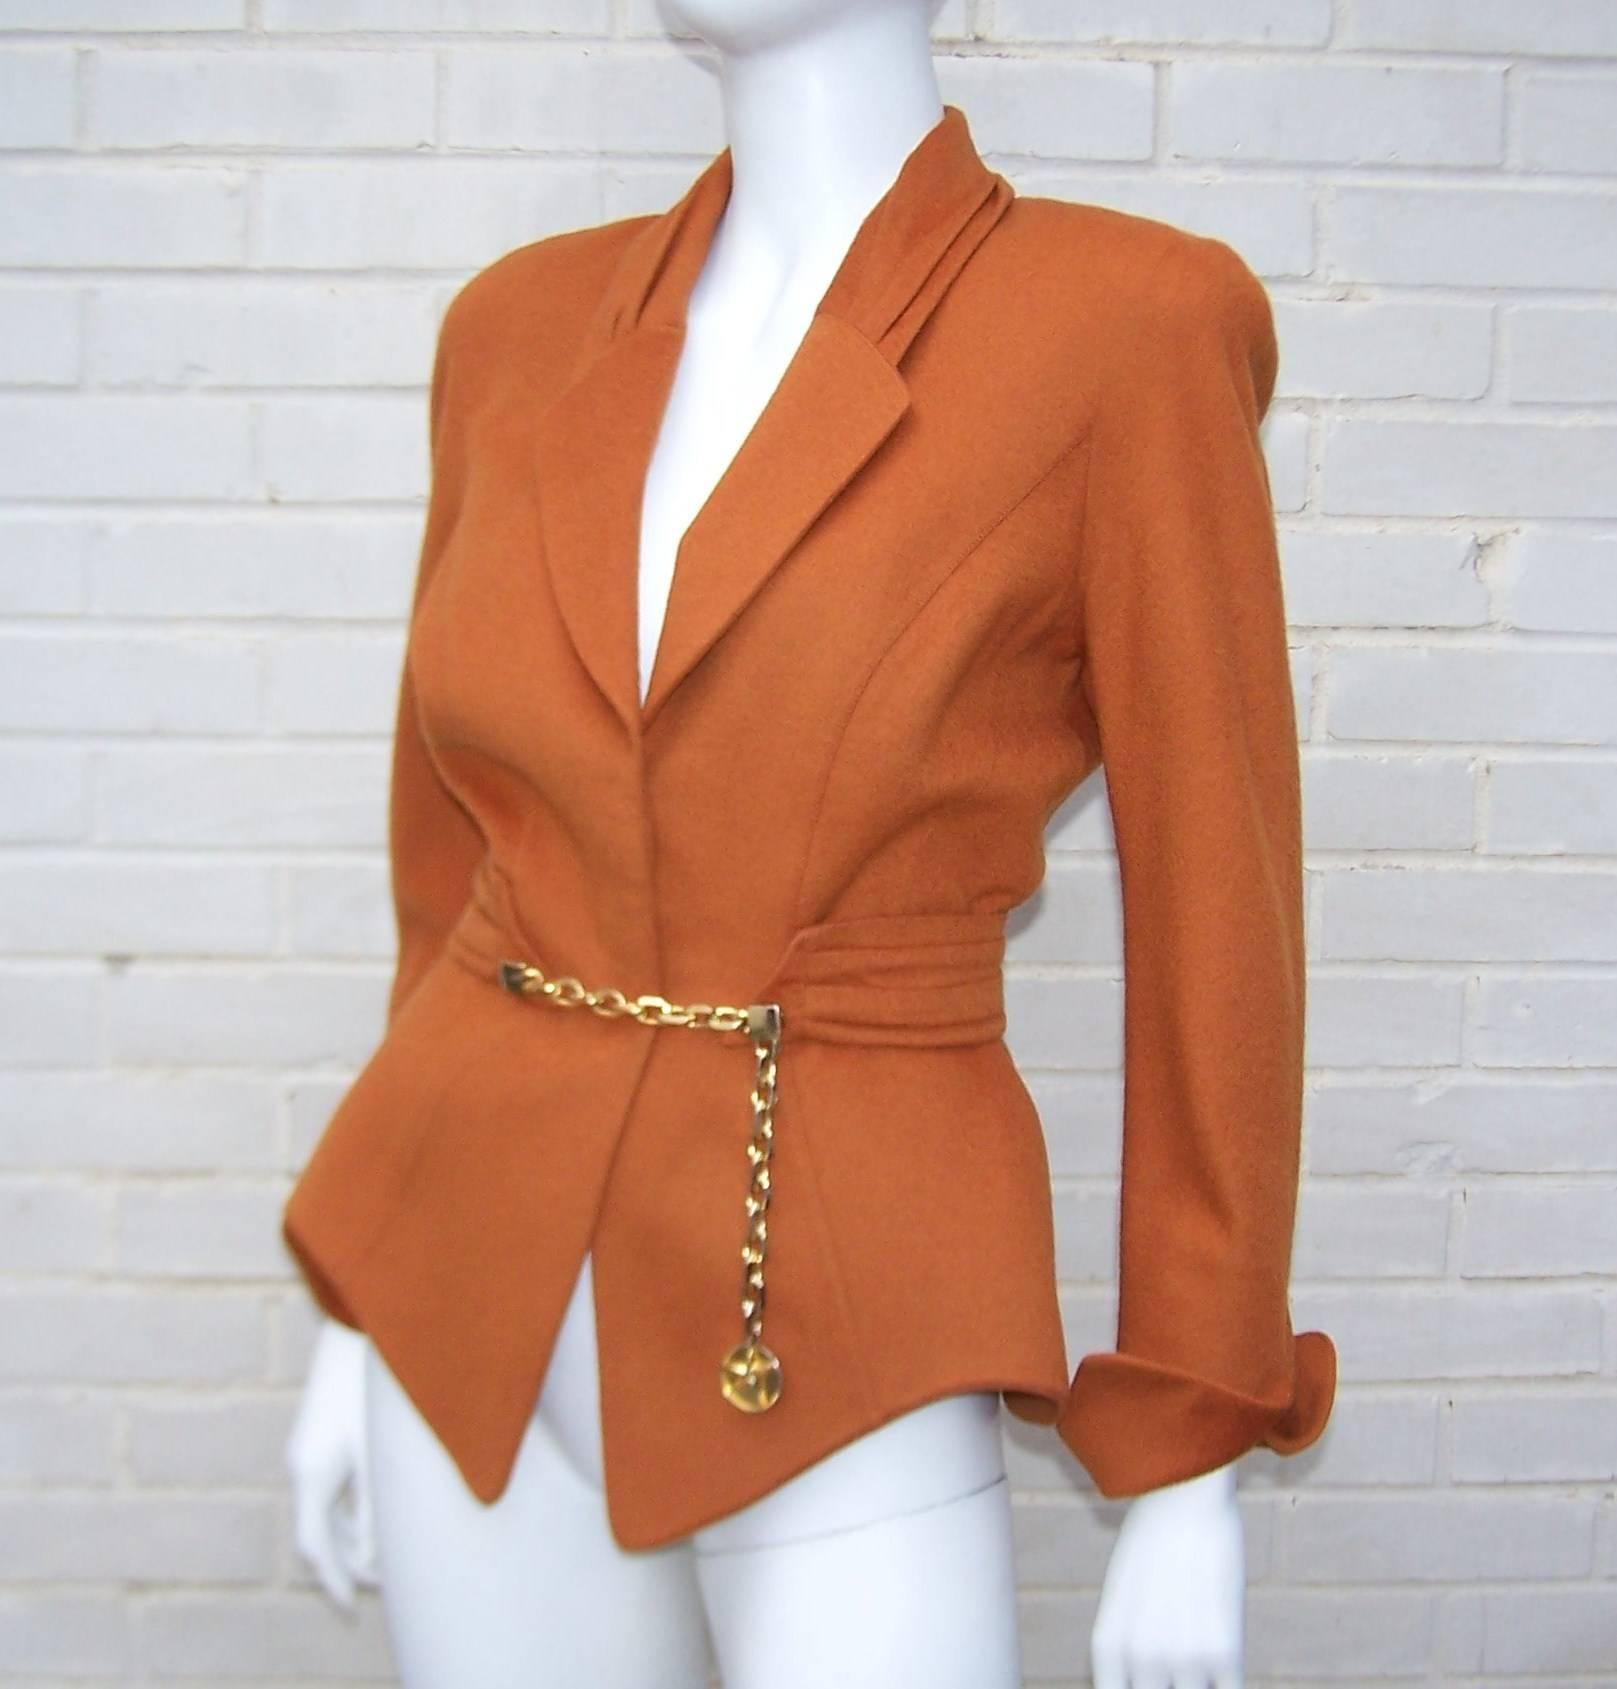 Attention to vintage style details with a unique futuristic silhouette are all hallmarks of French designer, Thierry Mugler.  This gorgeous wasp waist wool jacket is a beautiful pumpkin brown with soft pleating at the collar and a cummerbund style